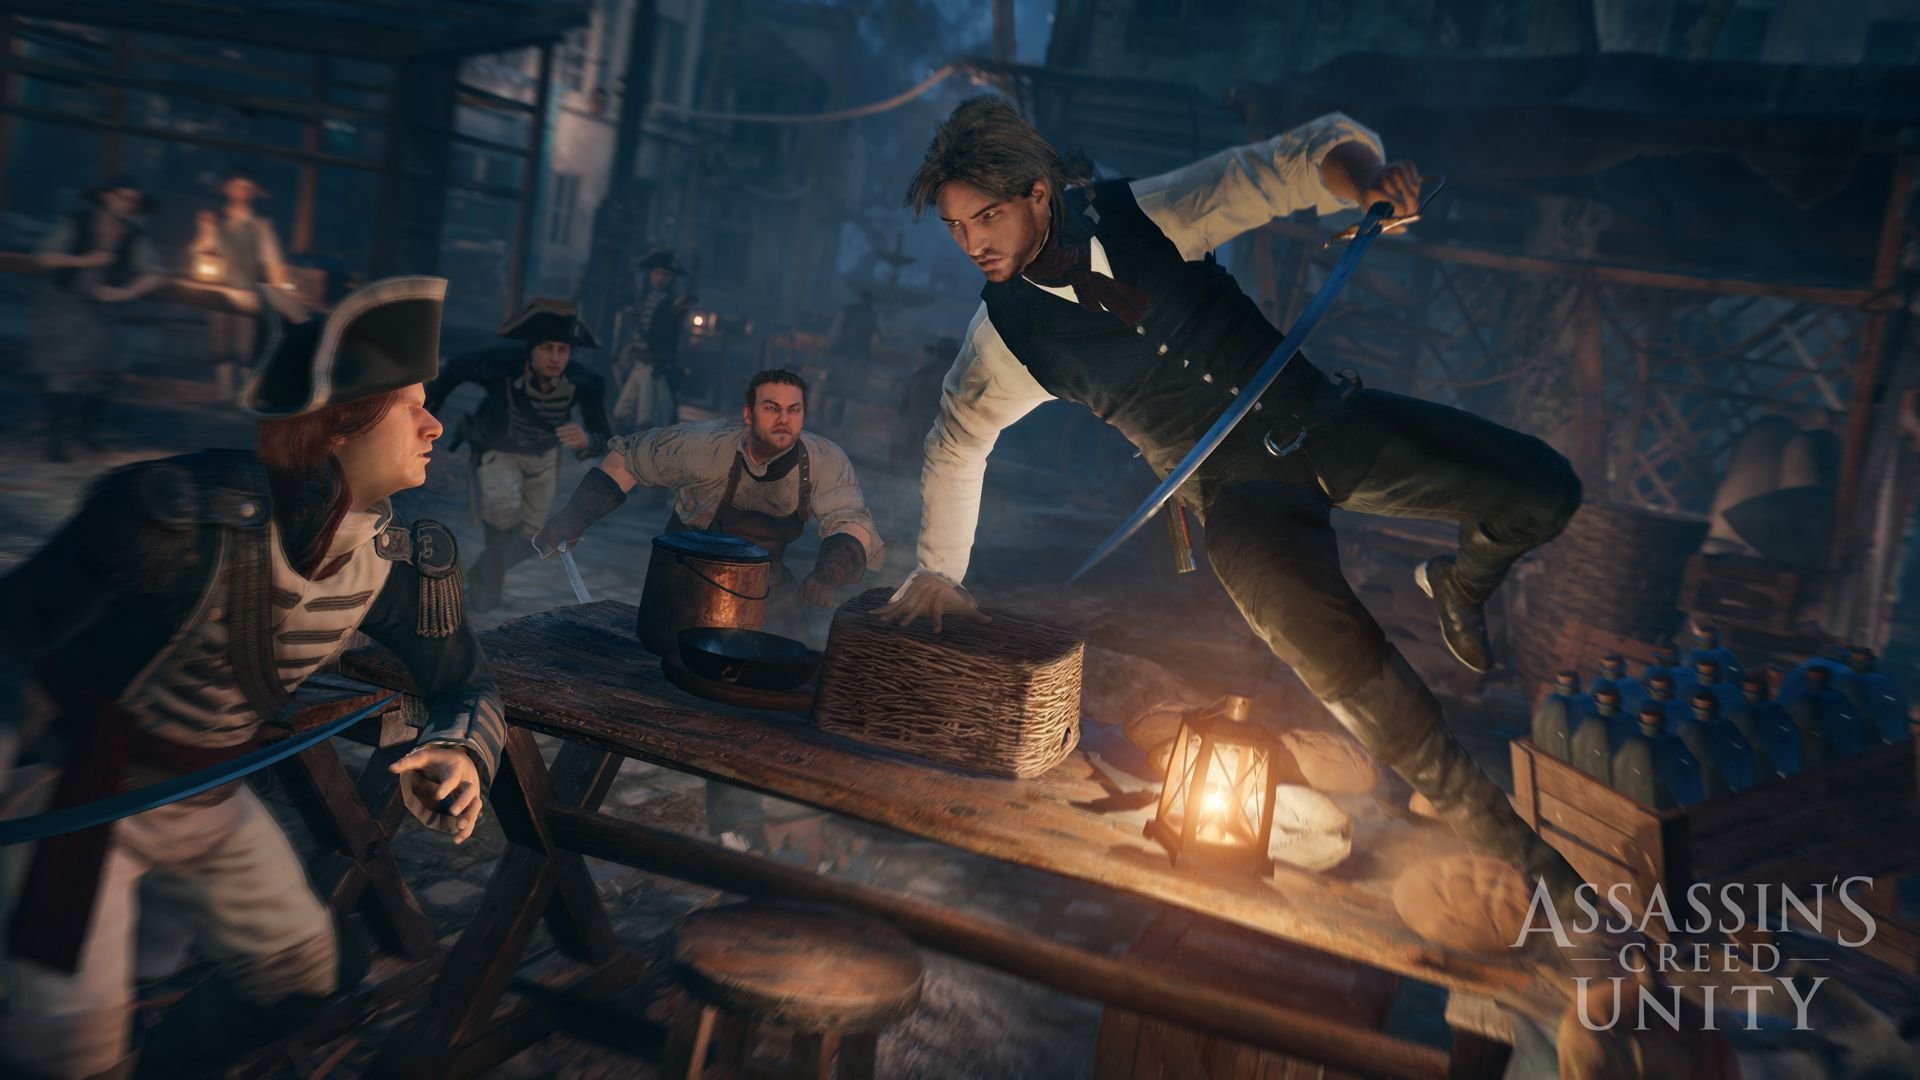 How To Download Assassin's Creed Unity in PC